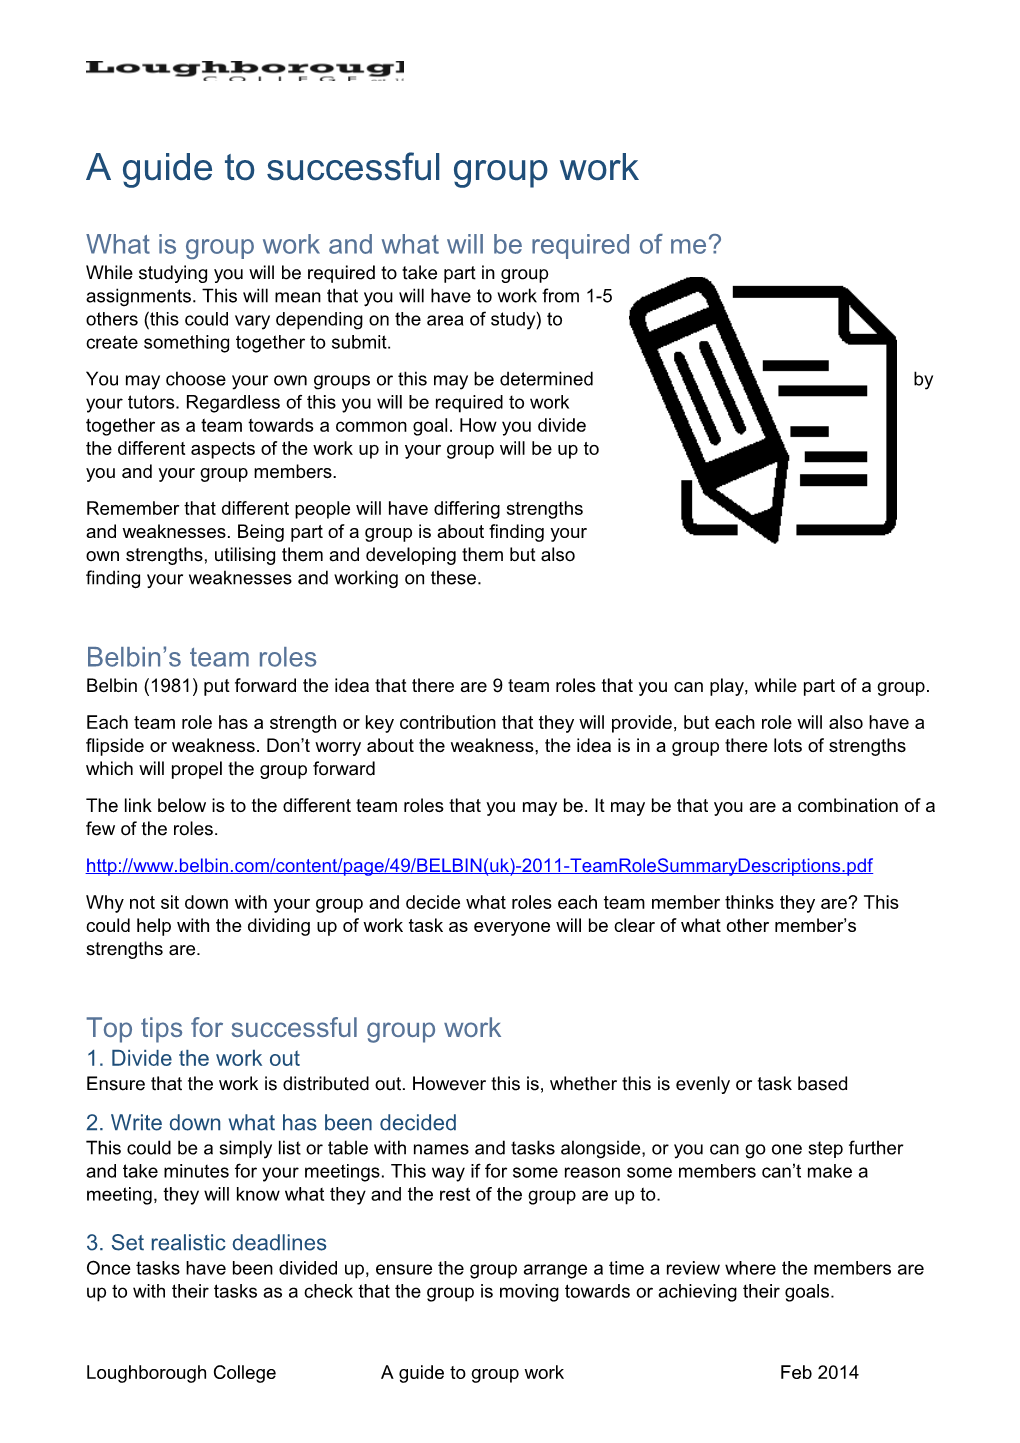 What Is Group Work and What Will Be Required of Me?